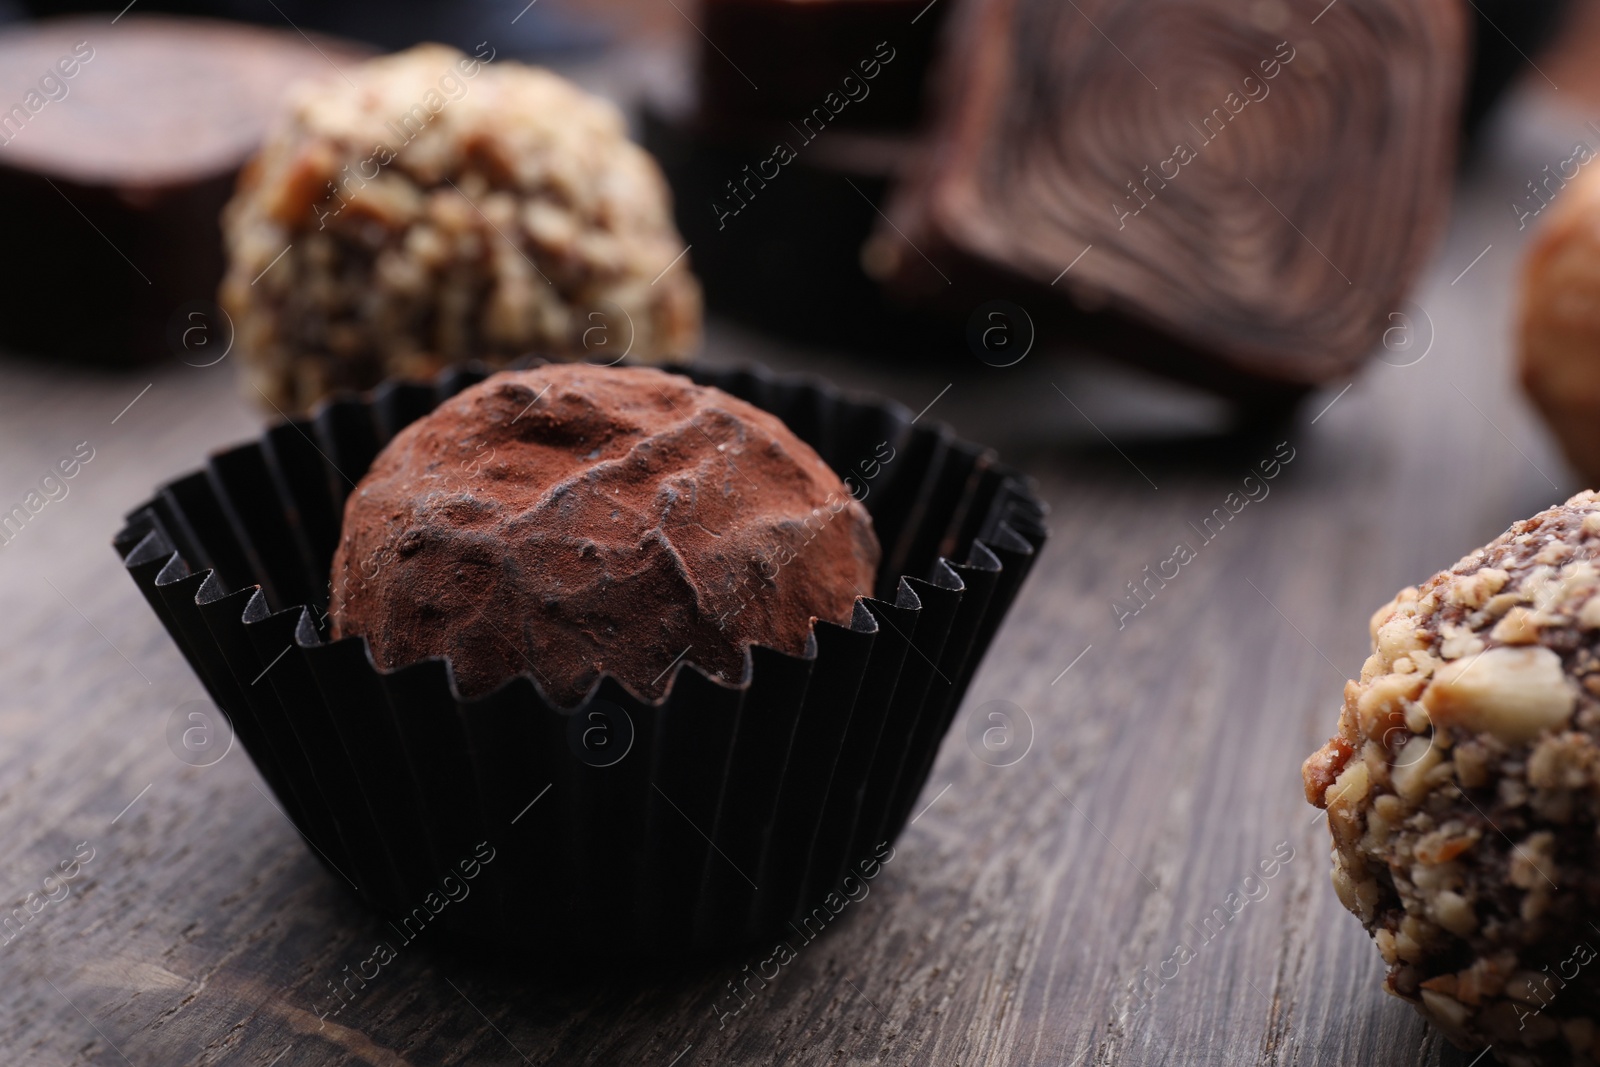 Photo of Tasty chocolate candies on table, closeup view